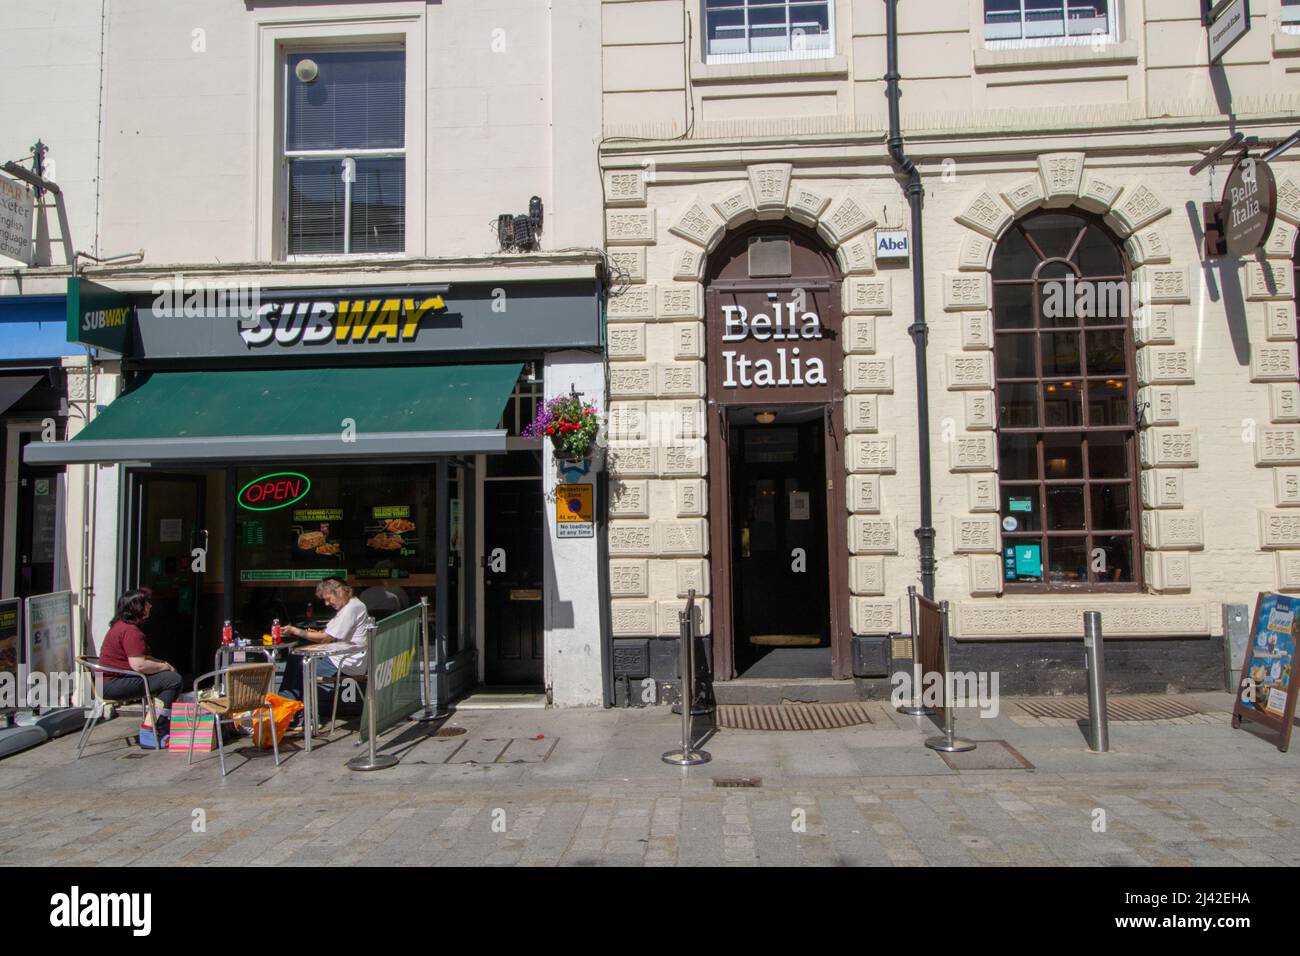 EXETER, UK - JULY 18, 2021 branches of Subway fast food restaurant and Bella Italia Italian restaurant on Queen Street Stock Photo